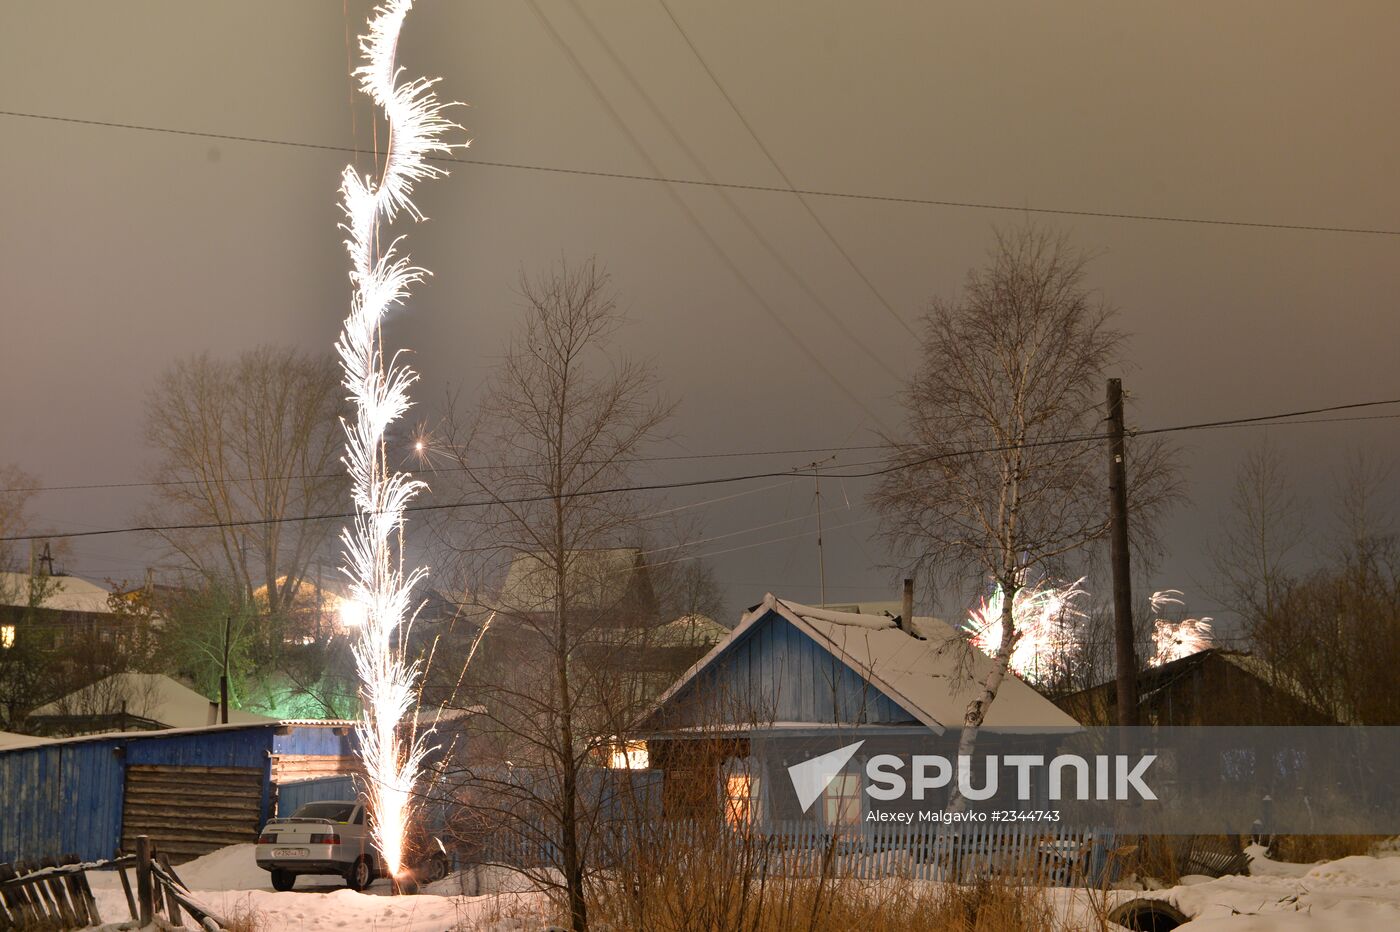 New Year celebrations across Russia